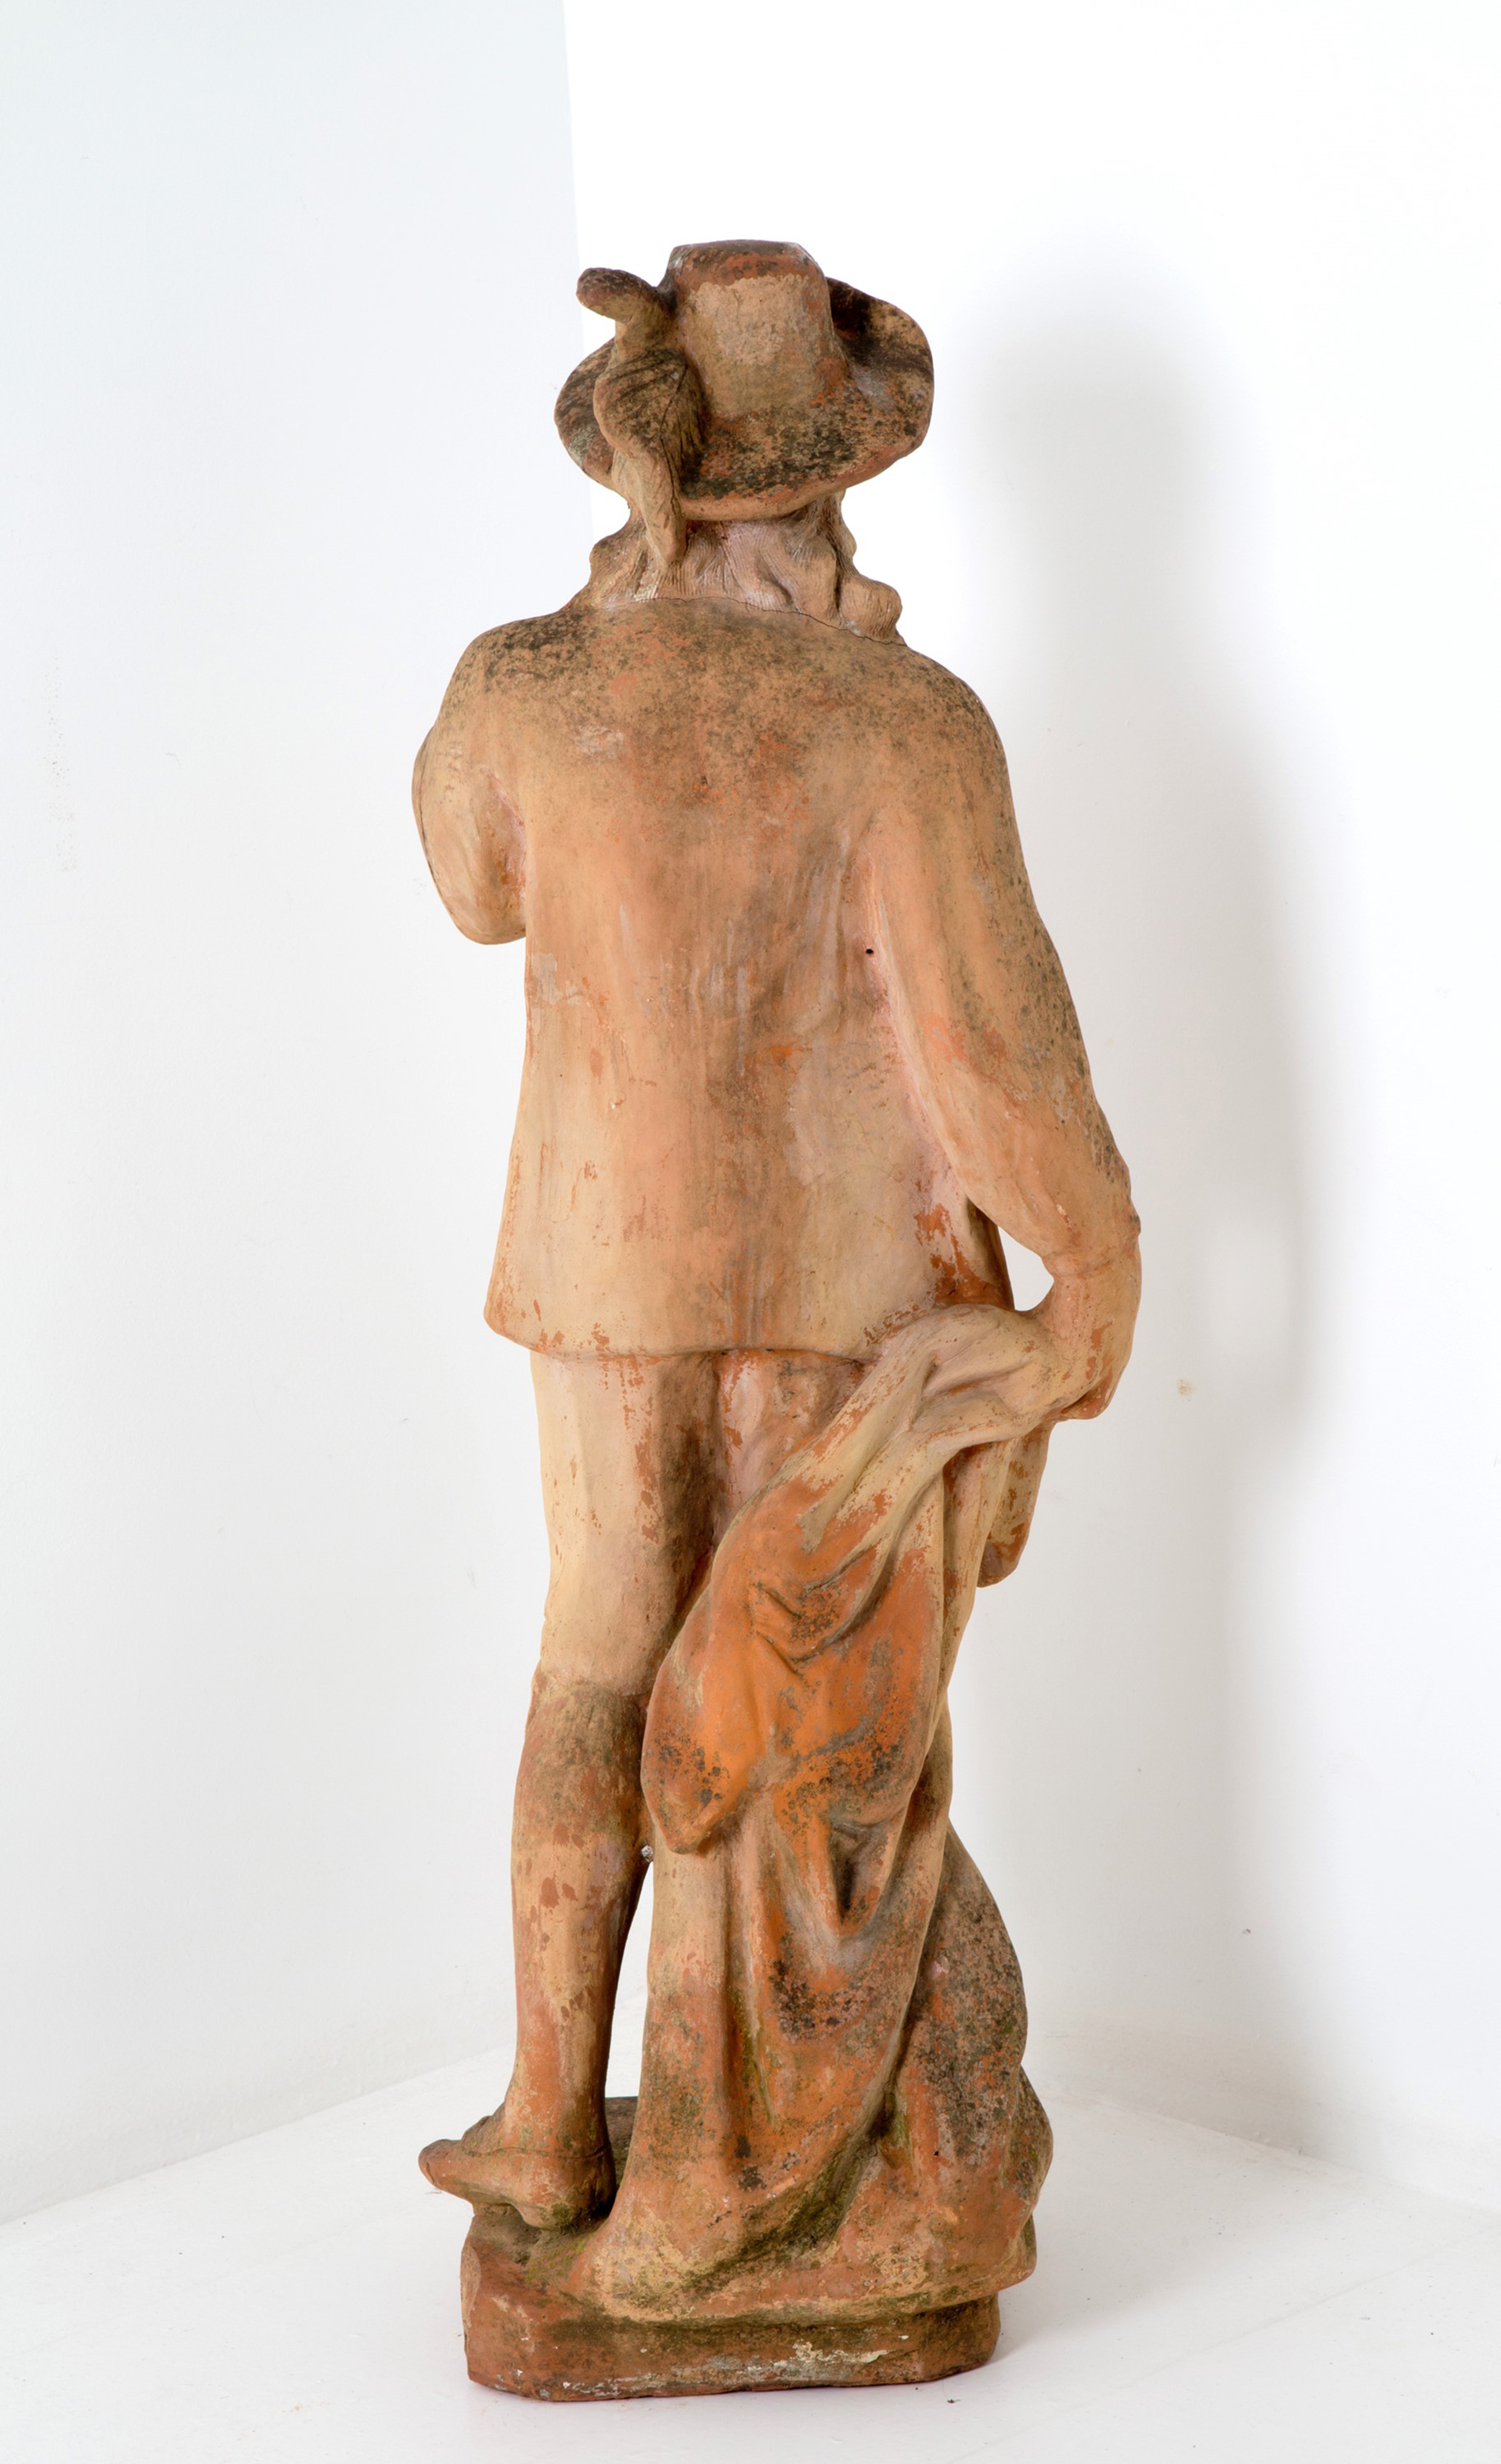 Terracotta sculpture "YOUNG NOBLE" - Image 3 of 4